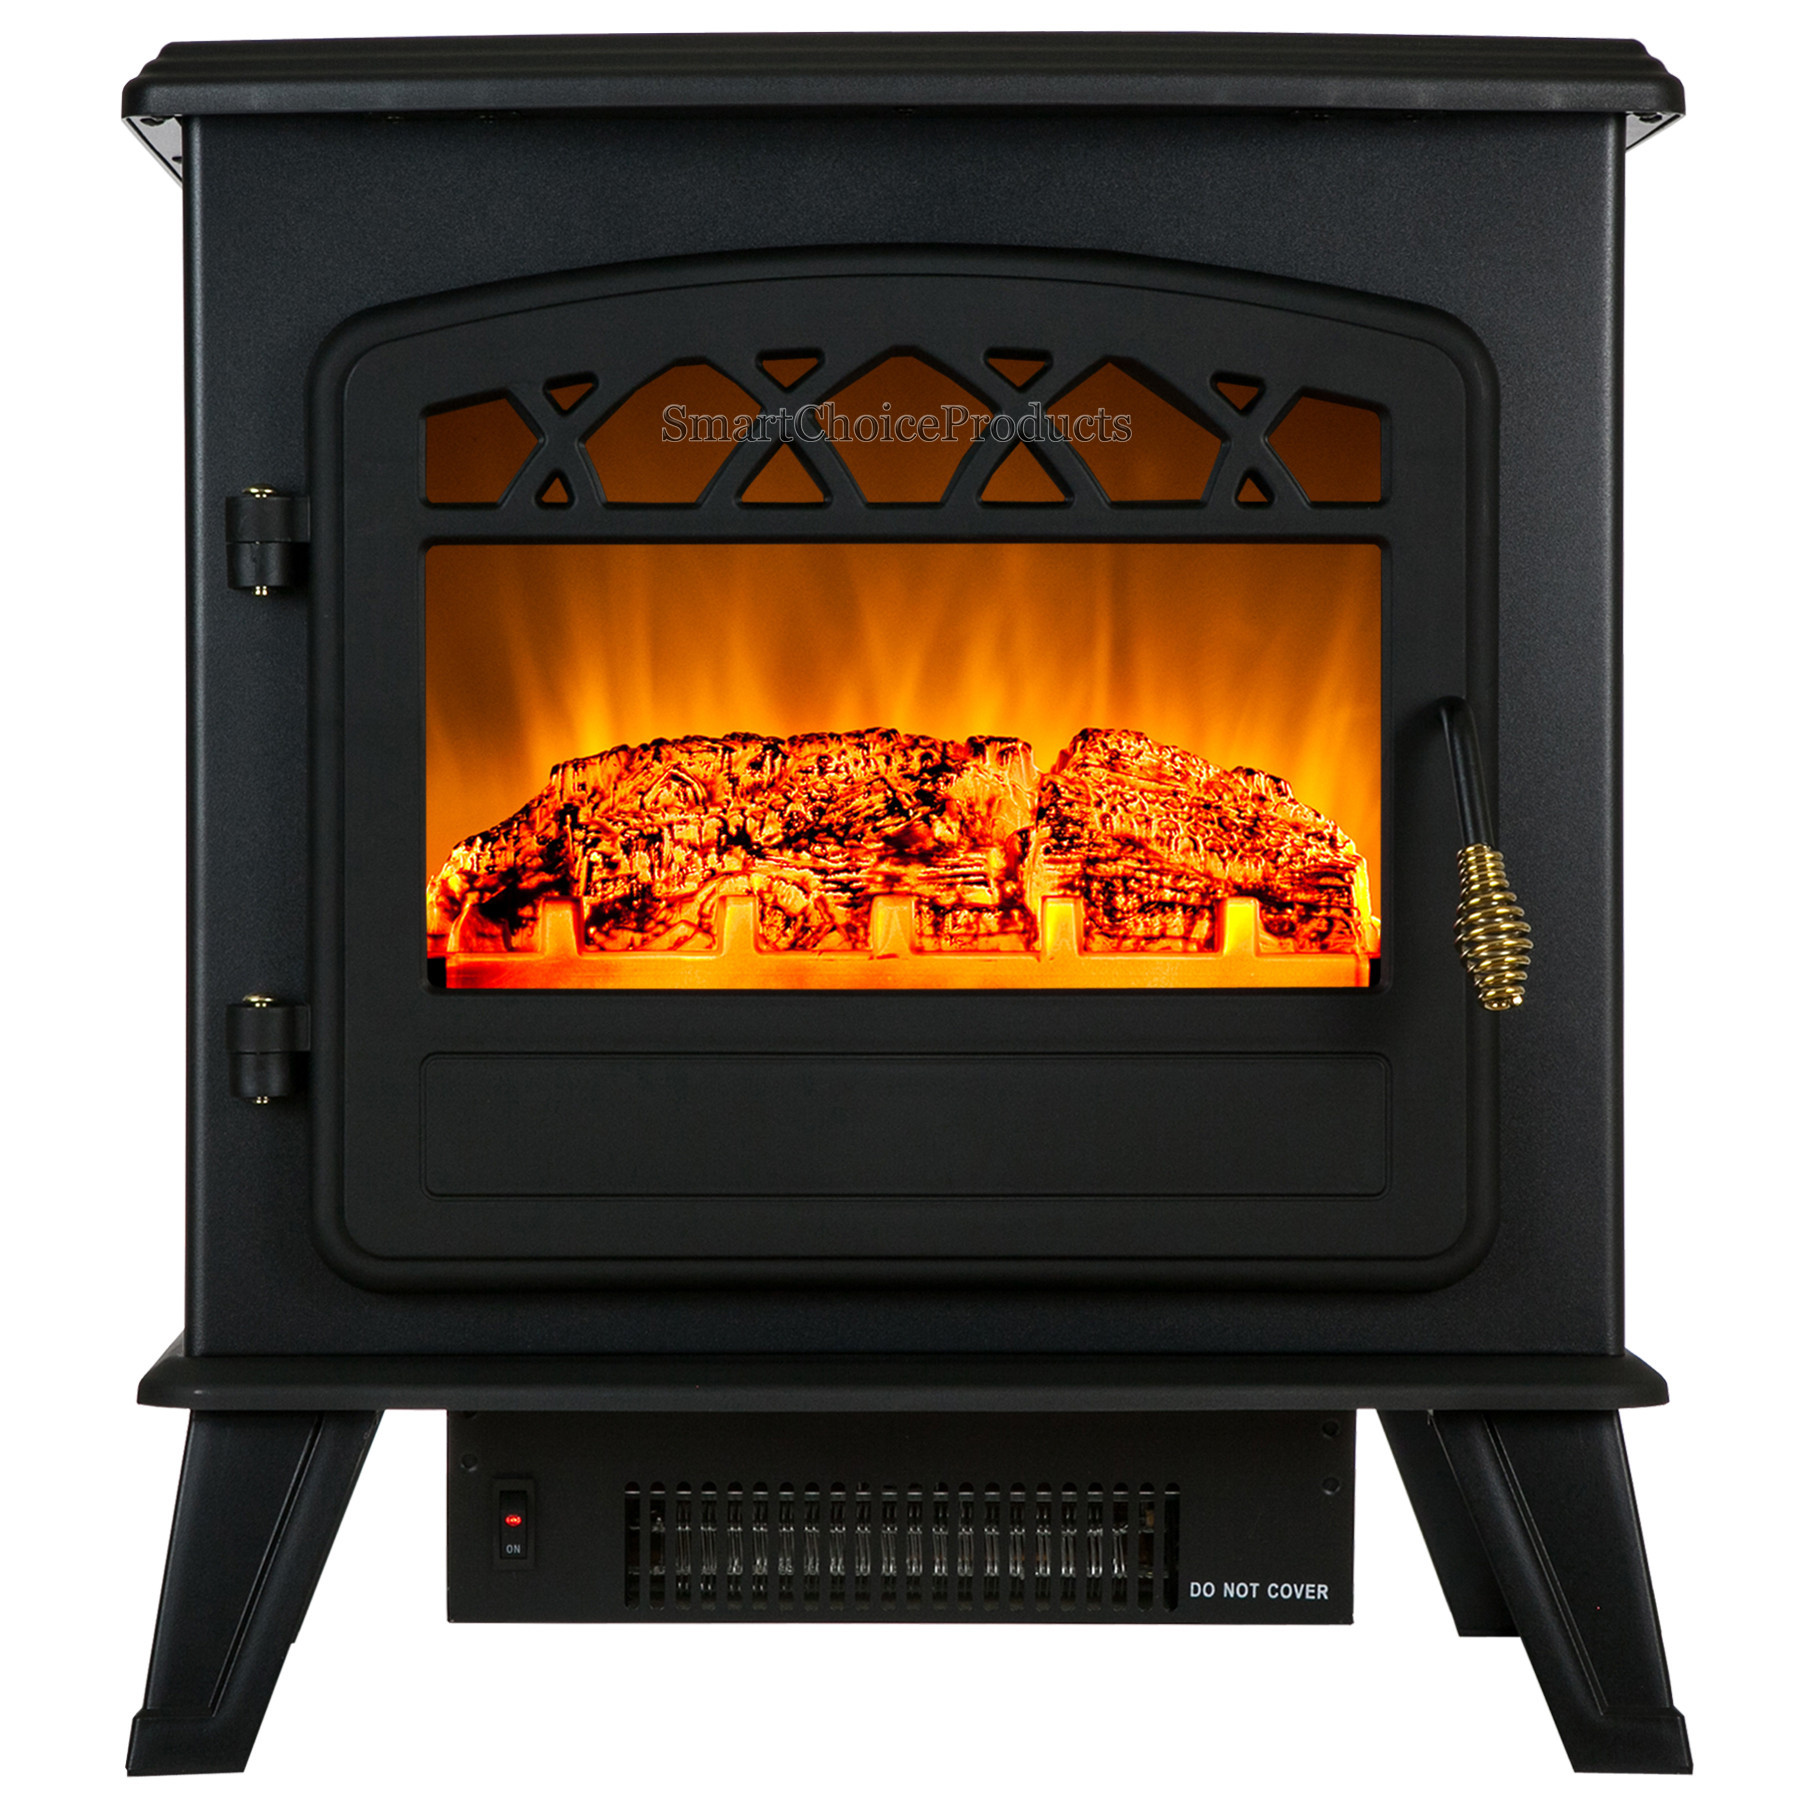 Retro Electric Fireplace
 Vintage 20" Electric Fireplace Tempered Glass Freestanding